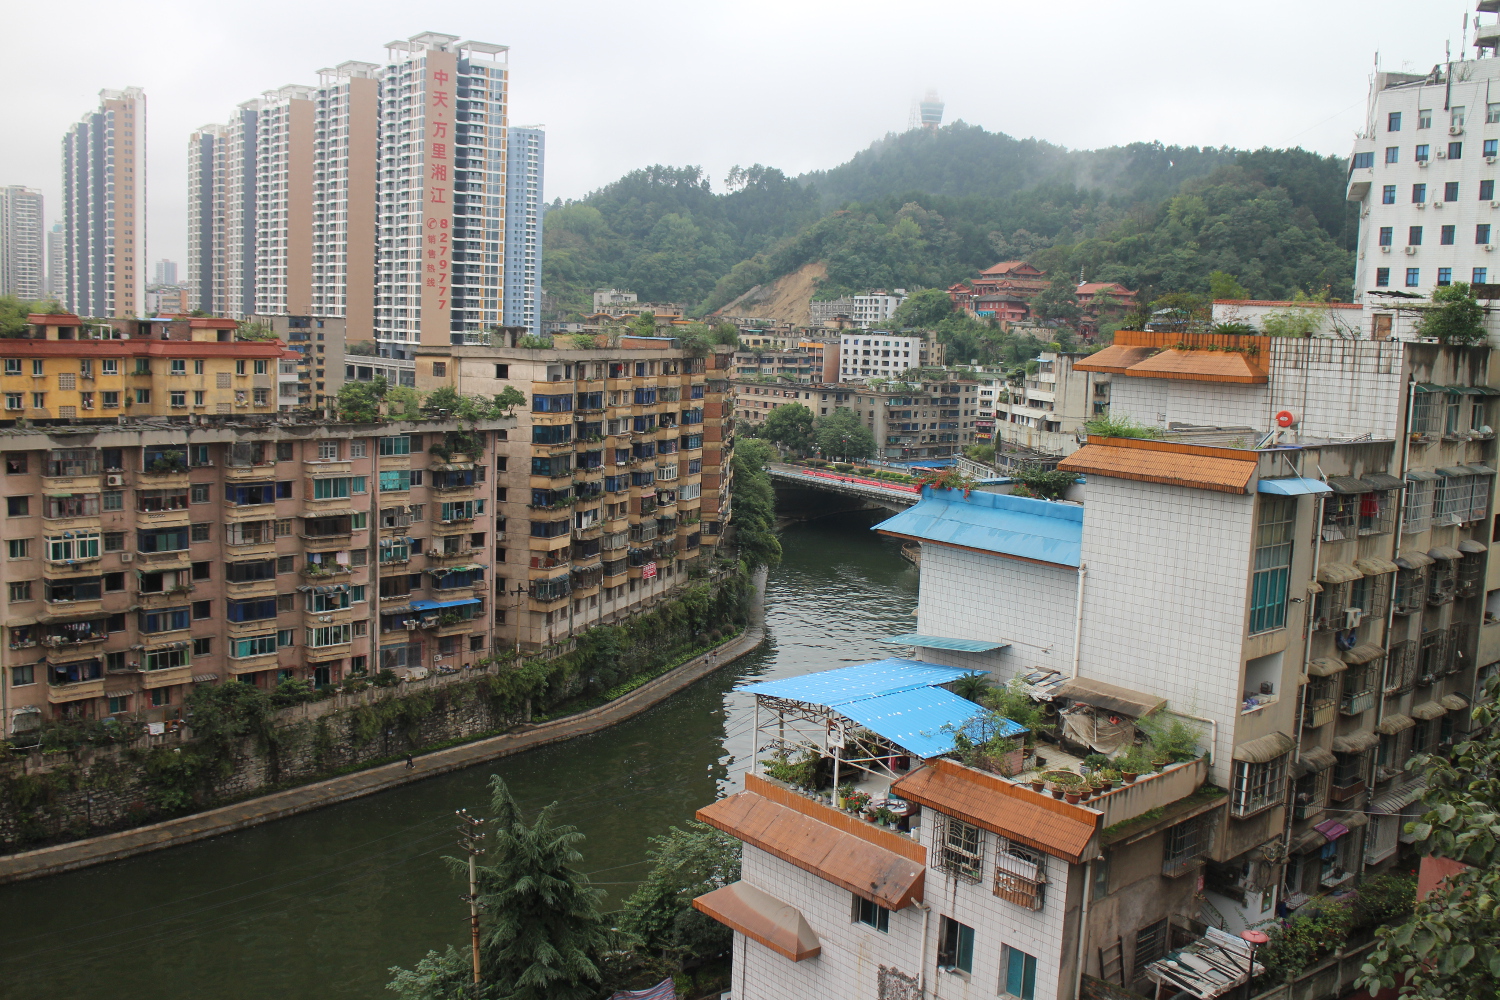 Views of old and new Zunyi from Xiangshan. Image by Thomas Bird / londoninfopage